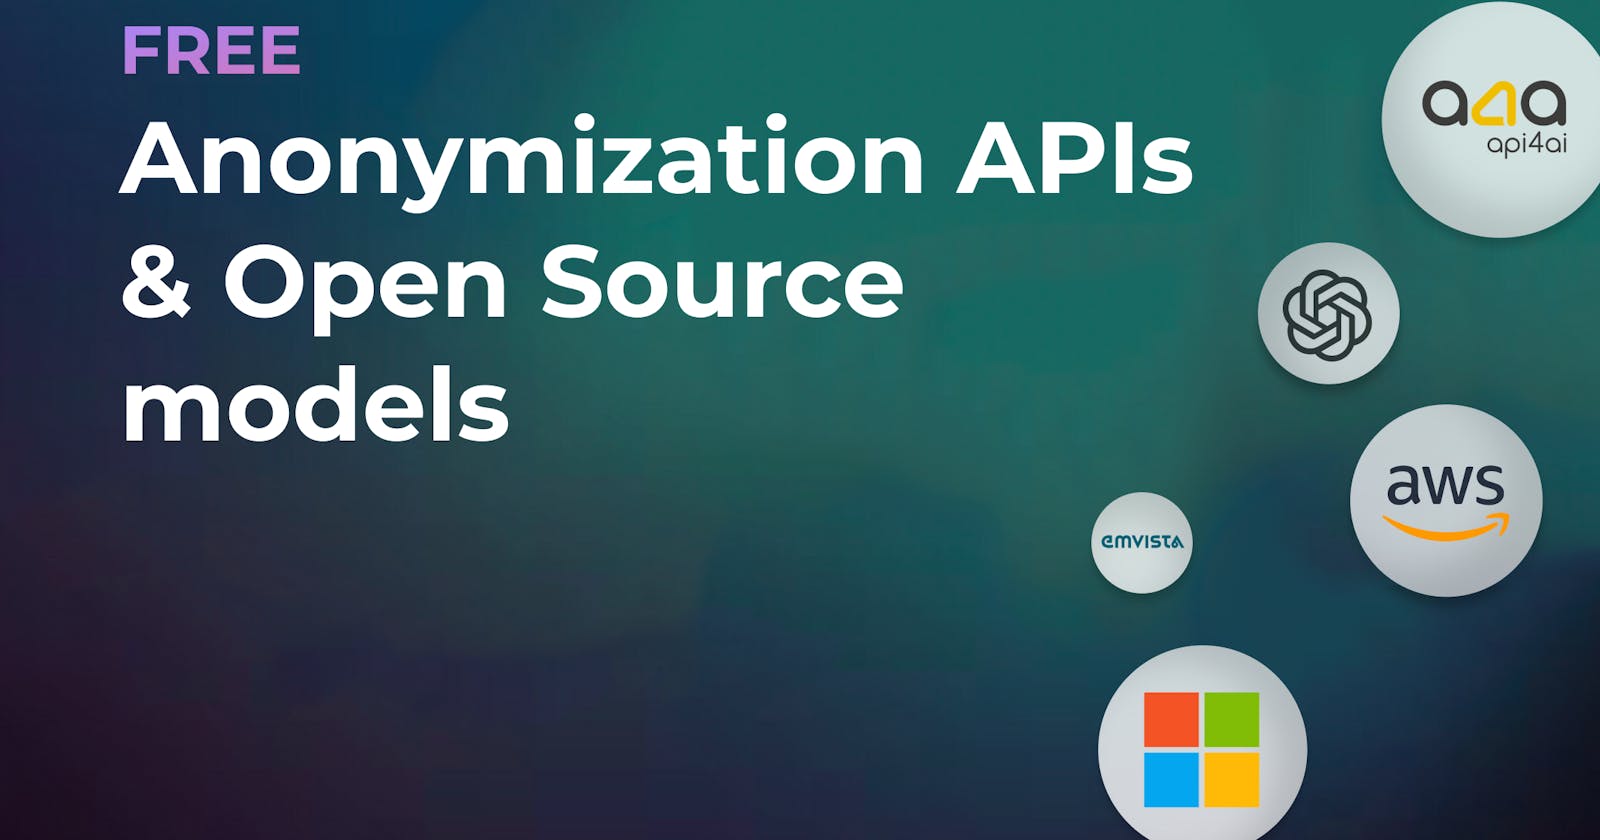 Top Free Anonymization tools, APIs, and Open Source models